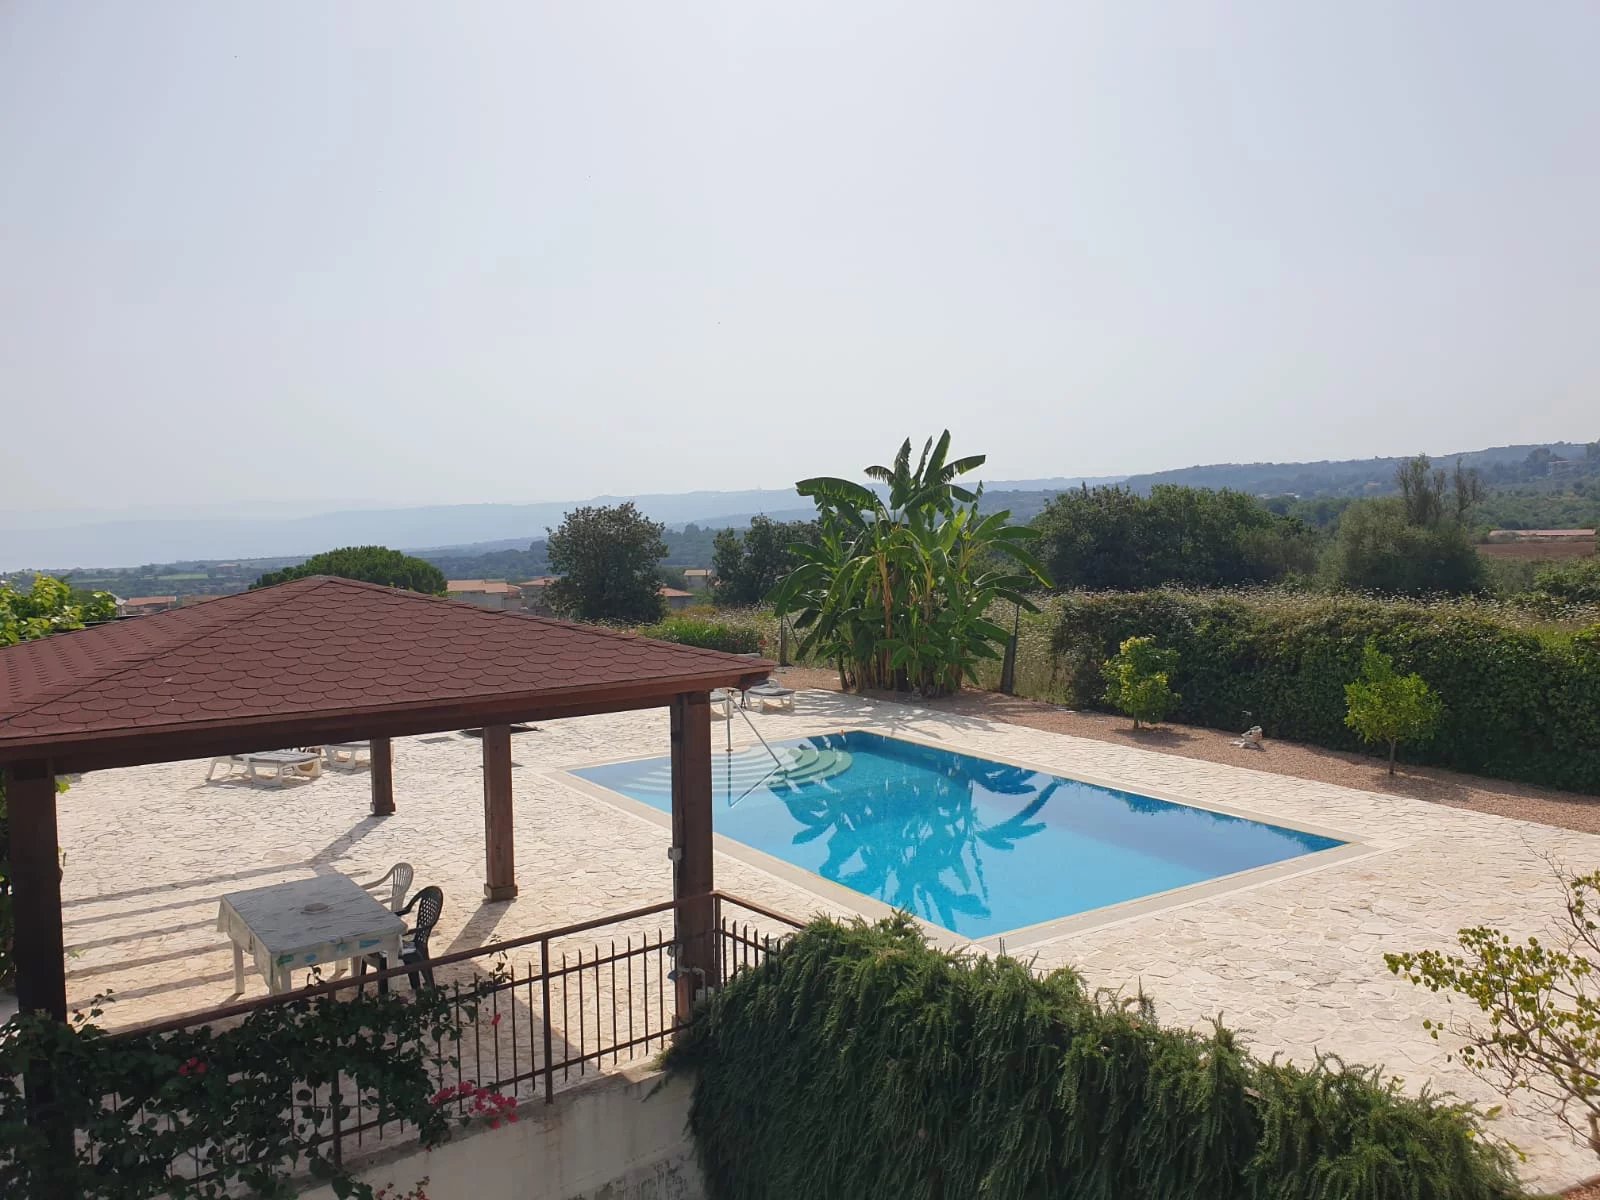 Villa with Private Apartment + 2 Sep Apartments